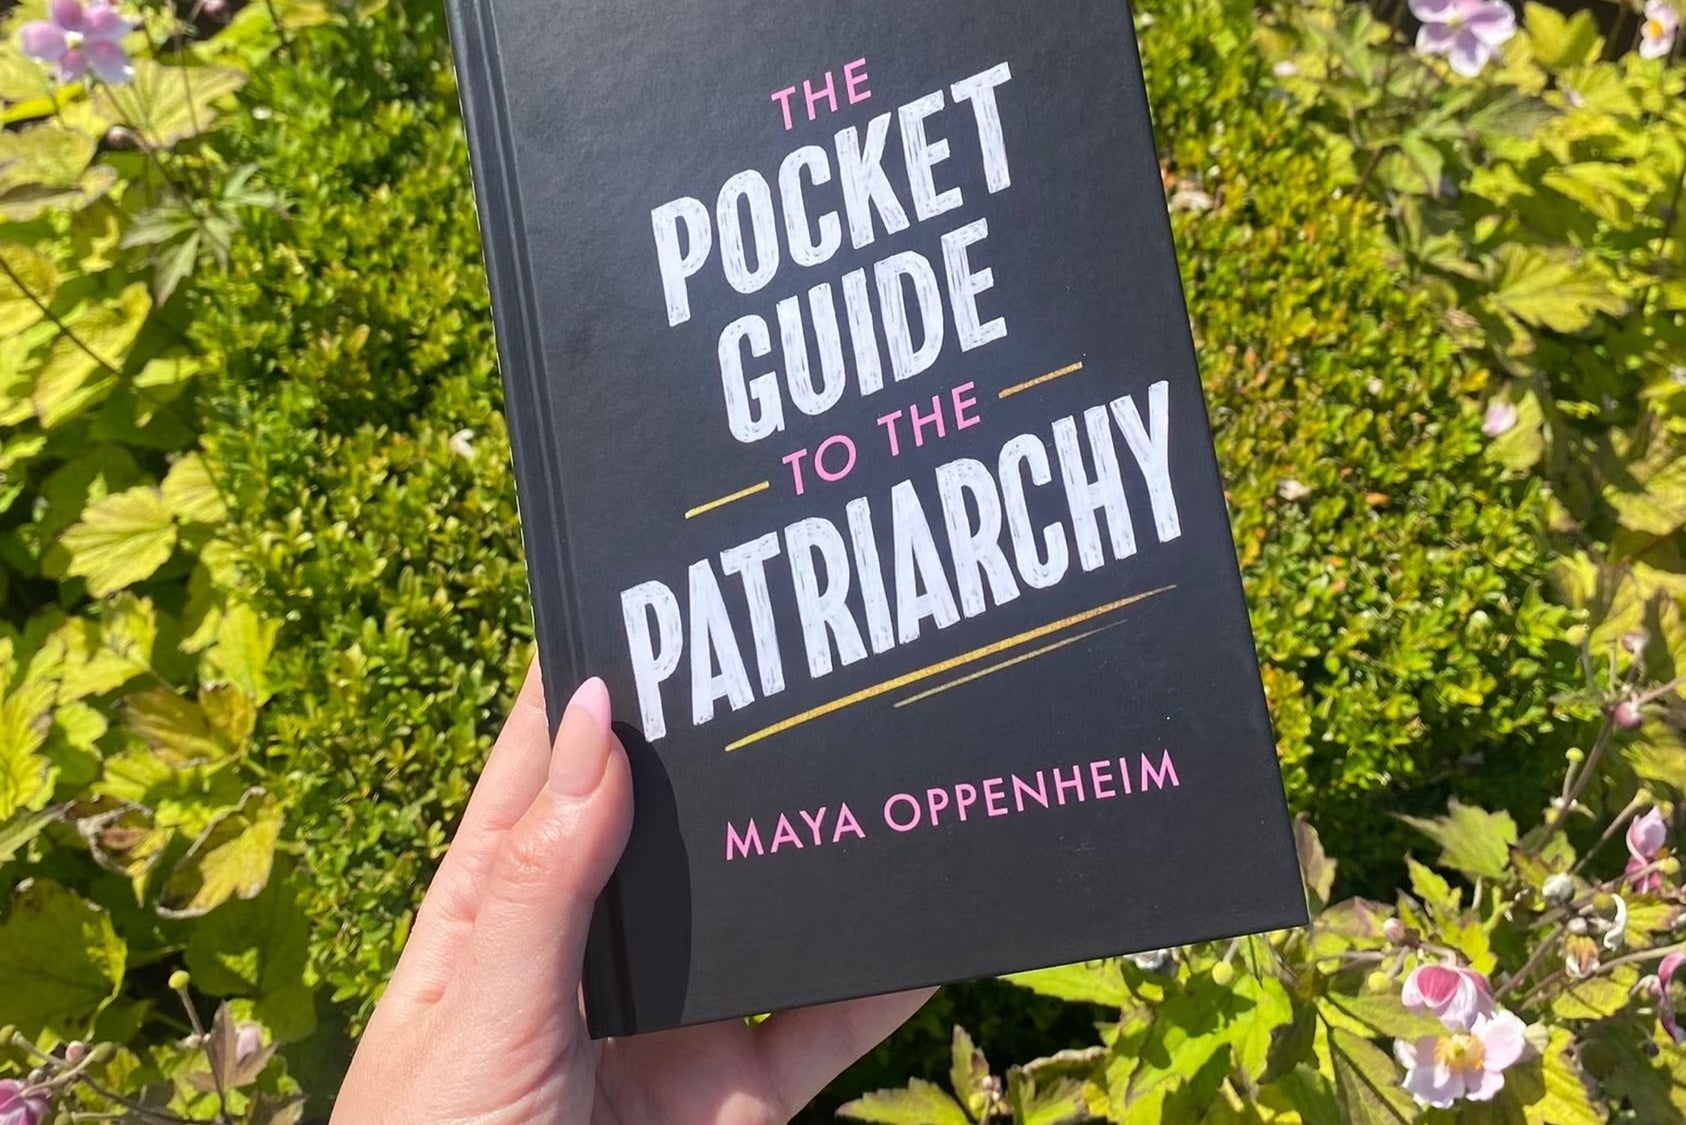 Maya Oppenheim’s Pocket Guide to the Patriarchy